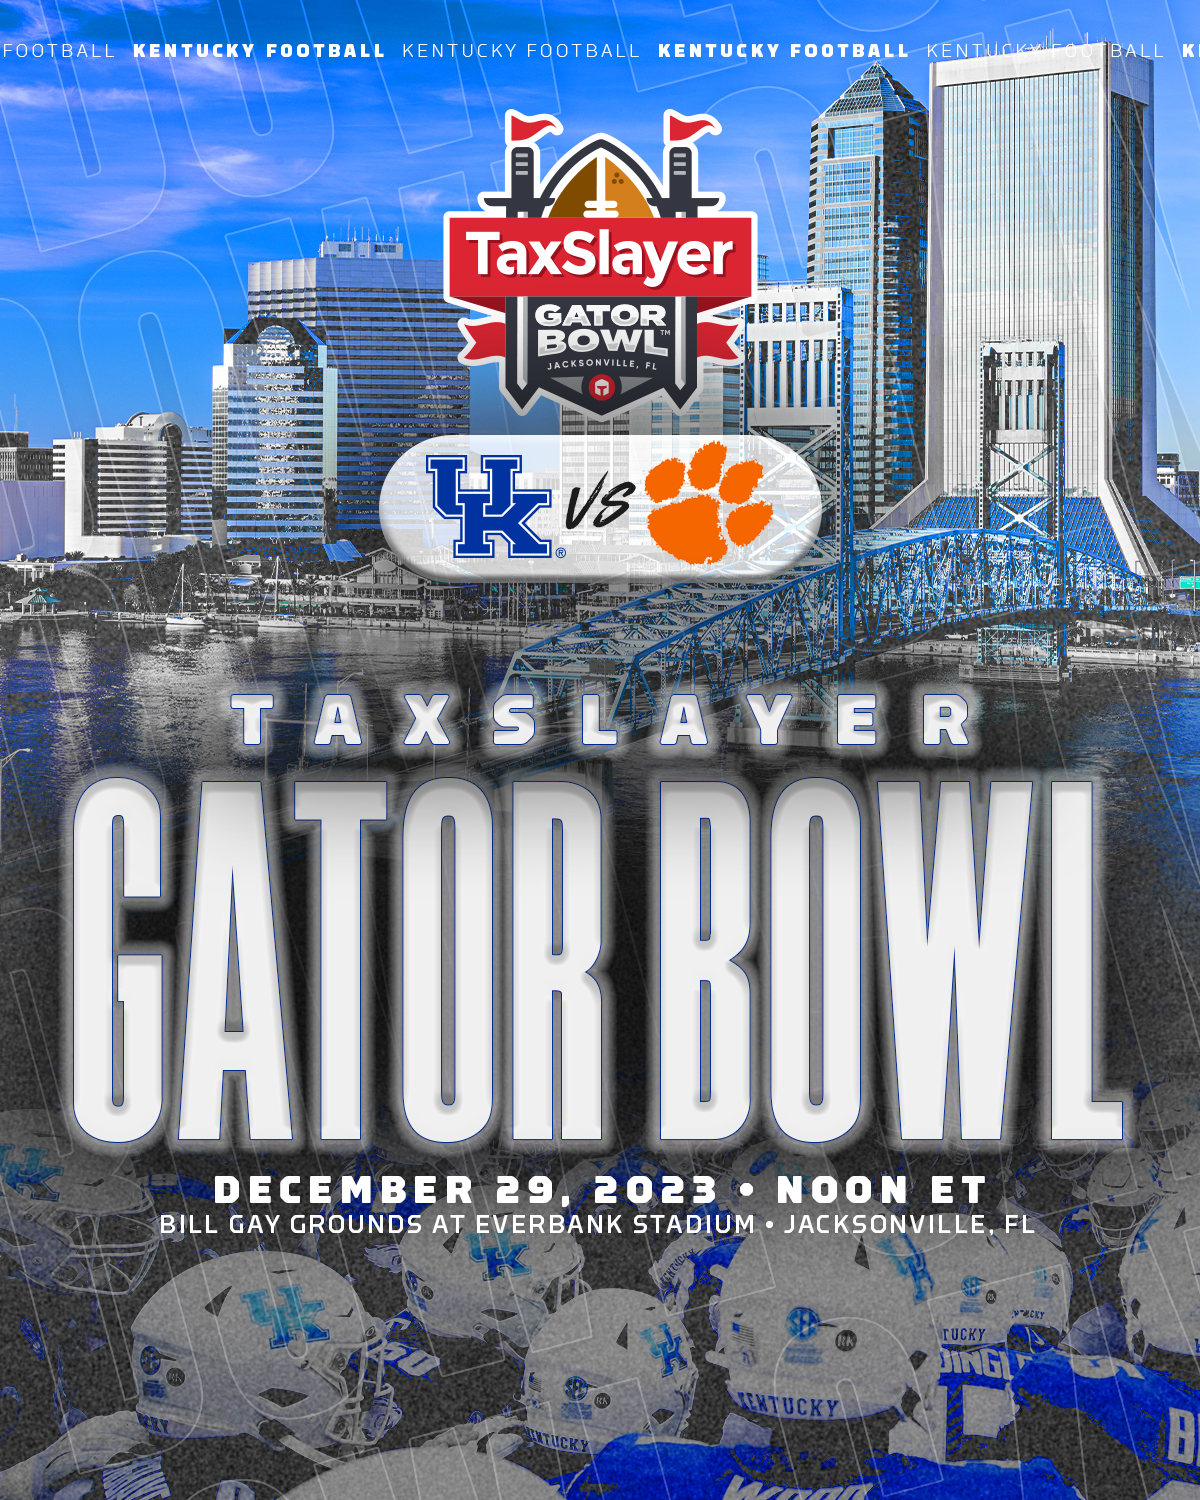 UK HealthCare Mark Stoops Show, Gator Bowl Preview Special 2023